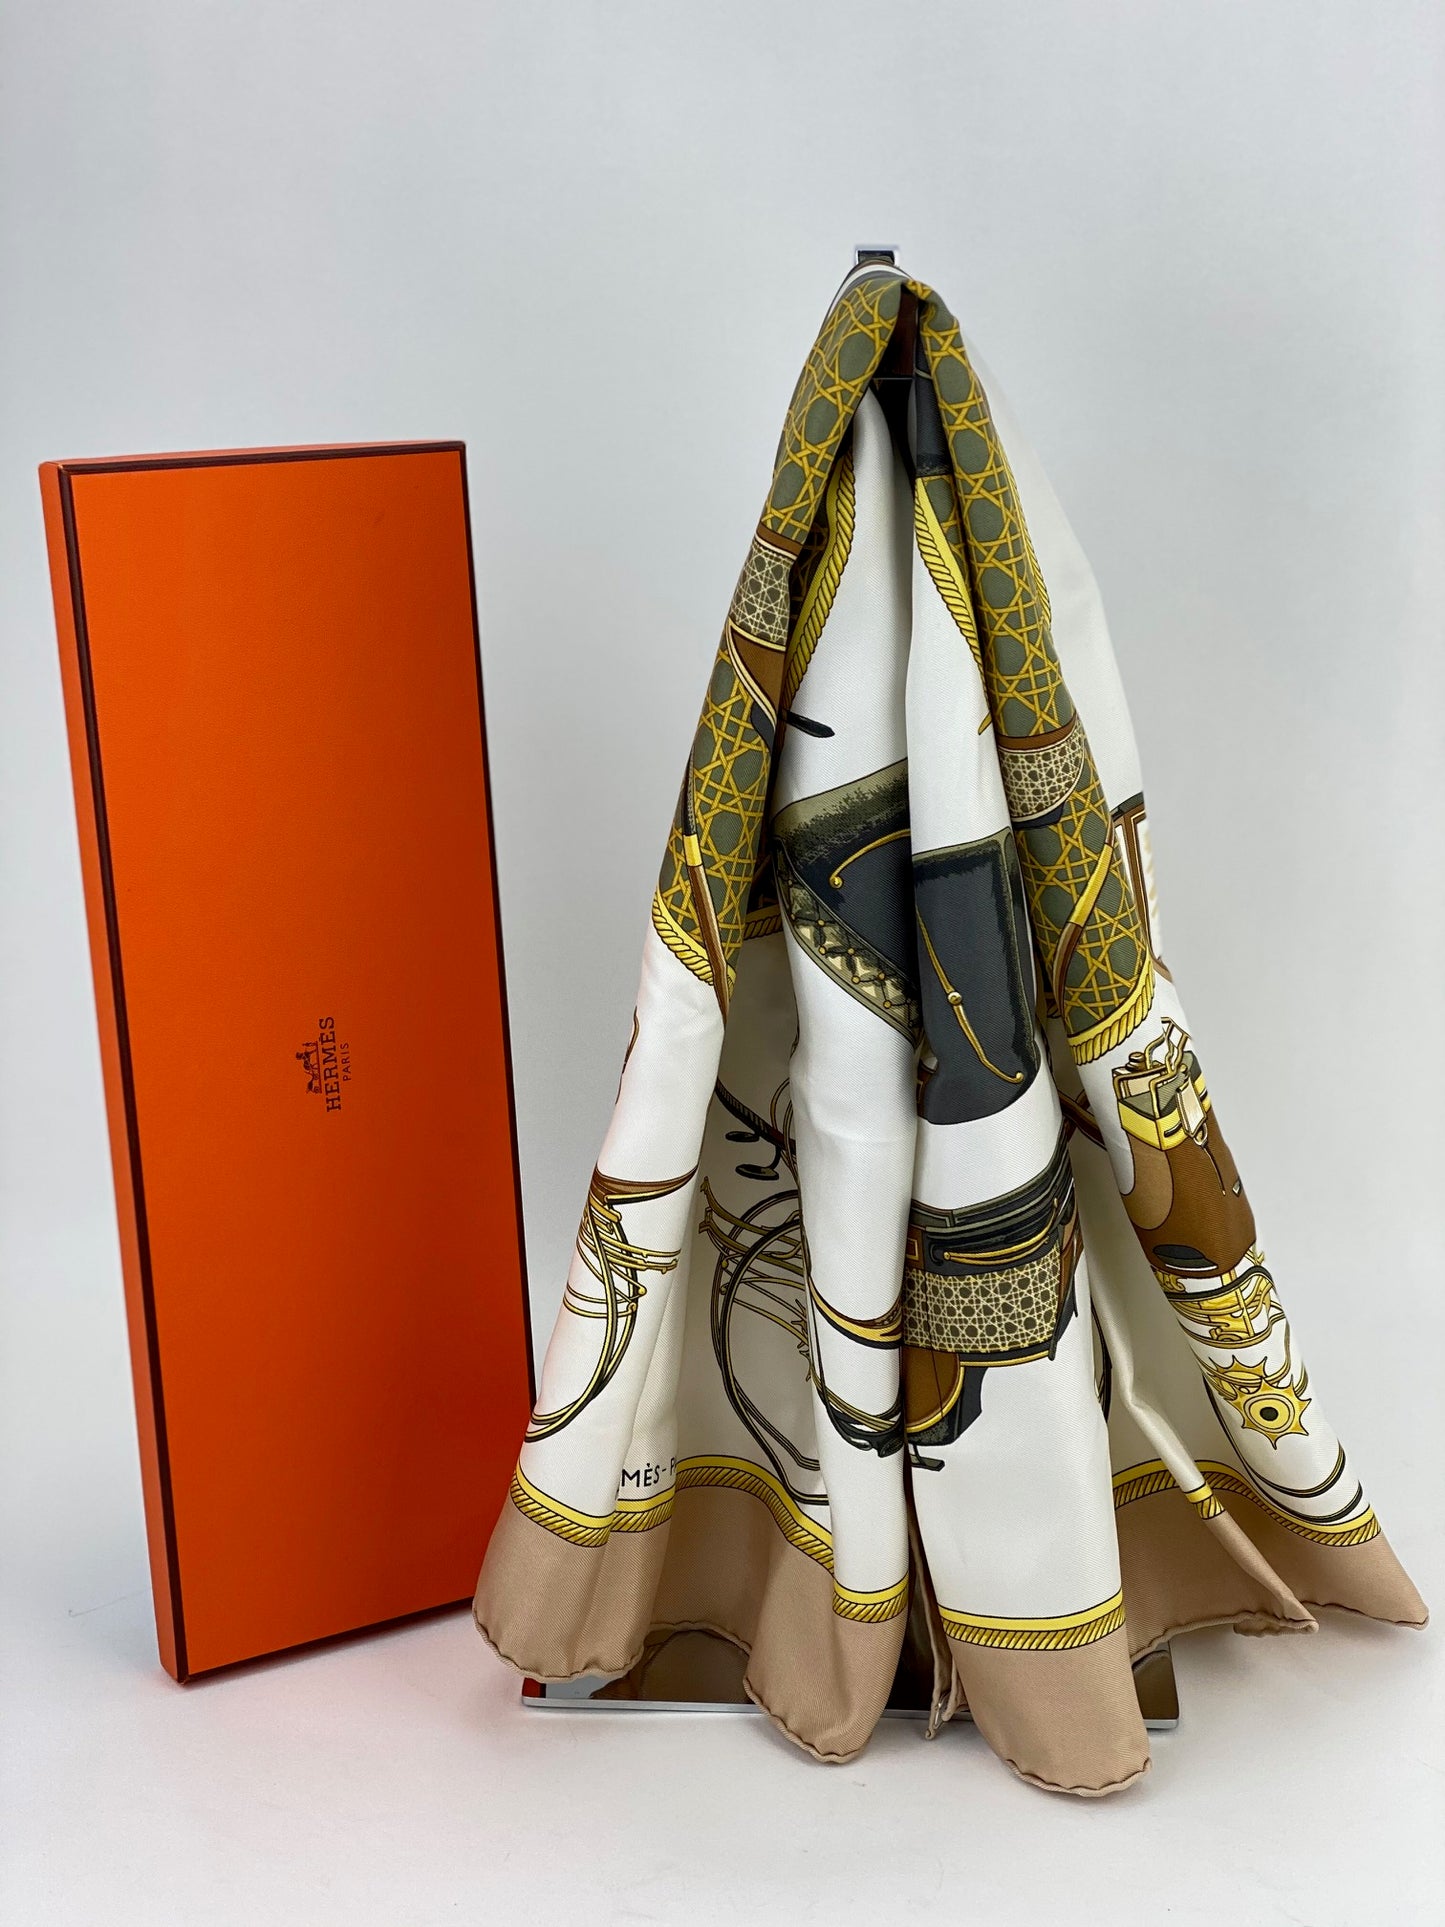 A SILK HERMES SCARF IN THE ORIGINAL BOX, FRANCE, OF RECENT